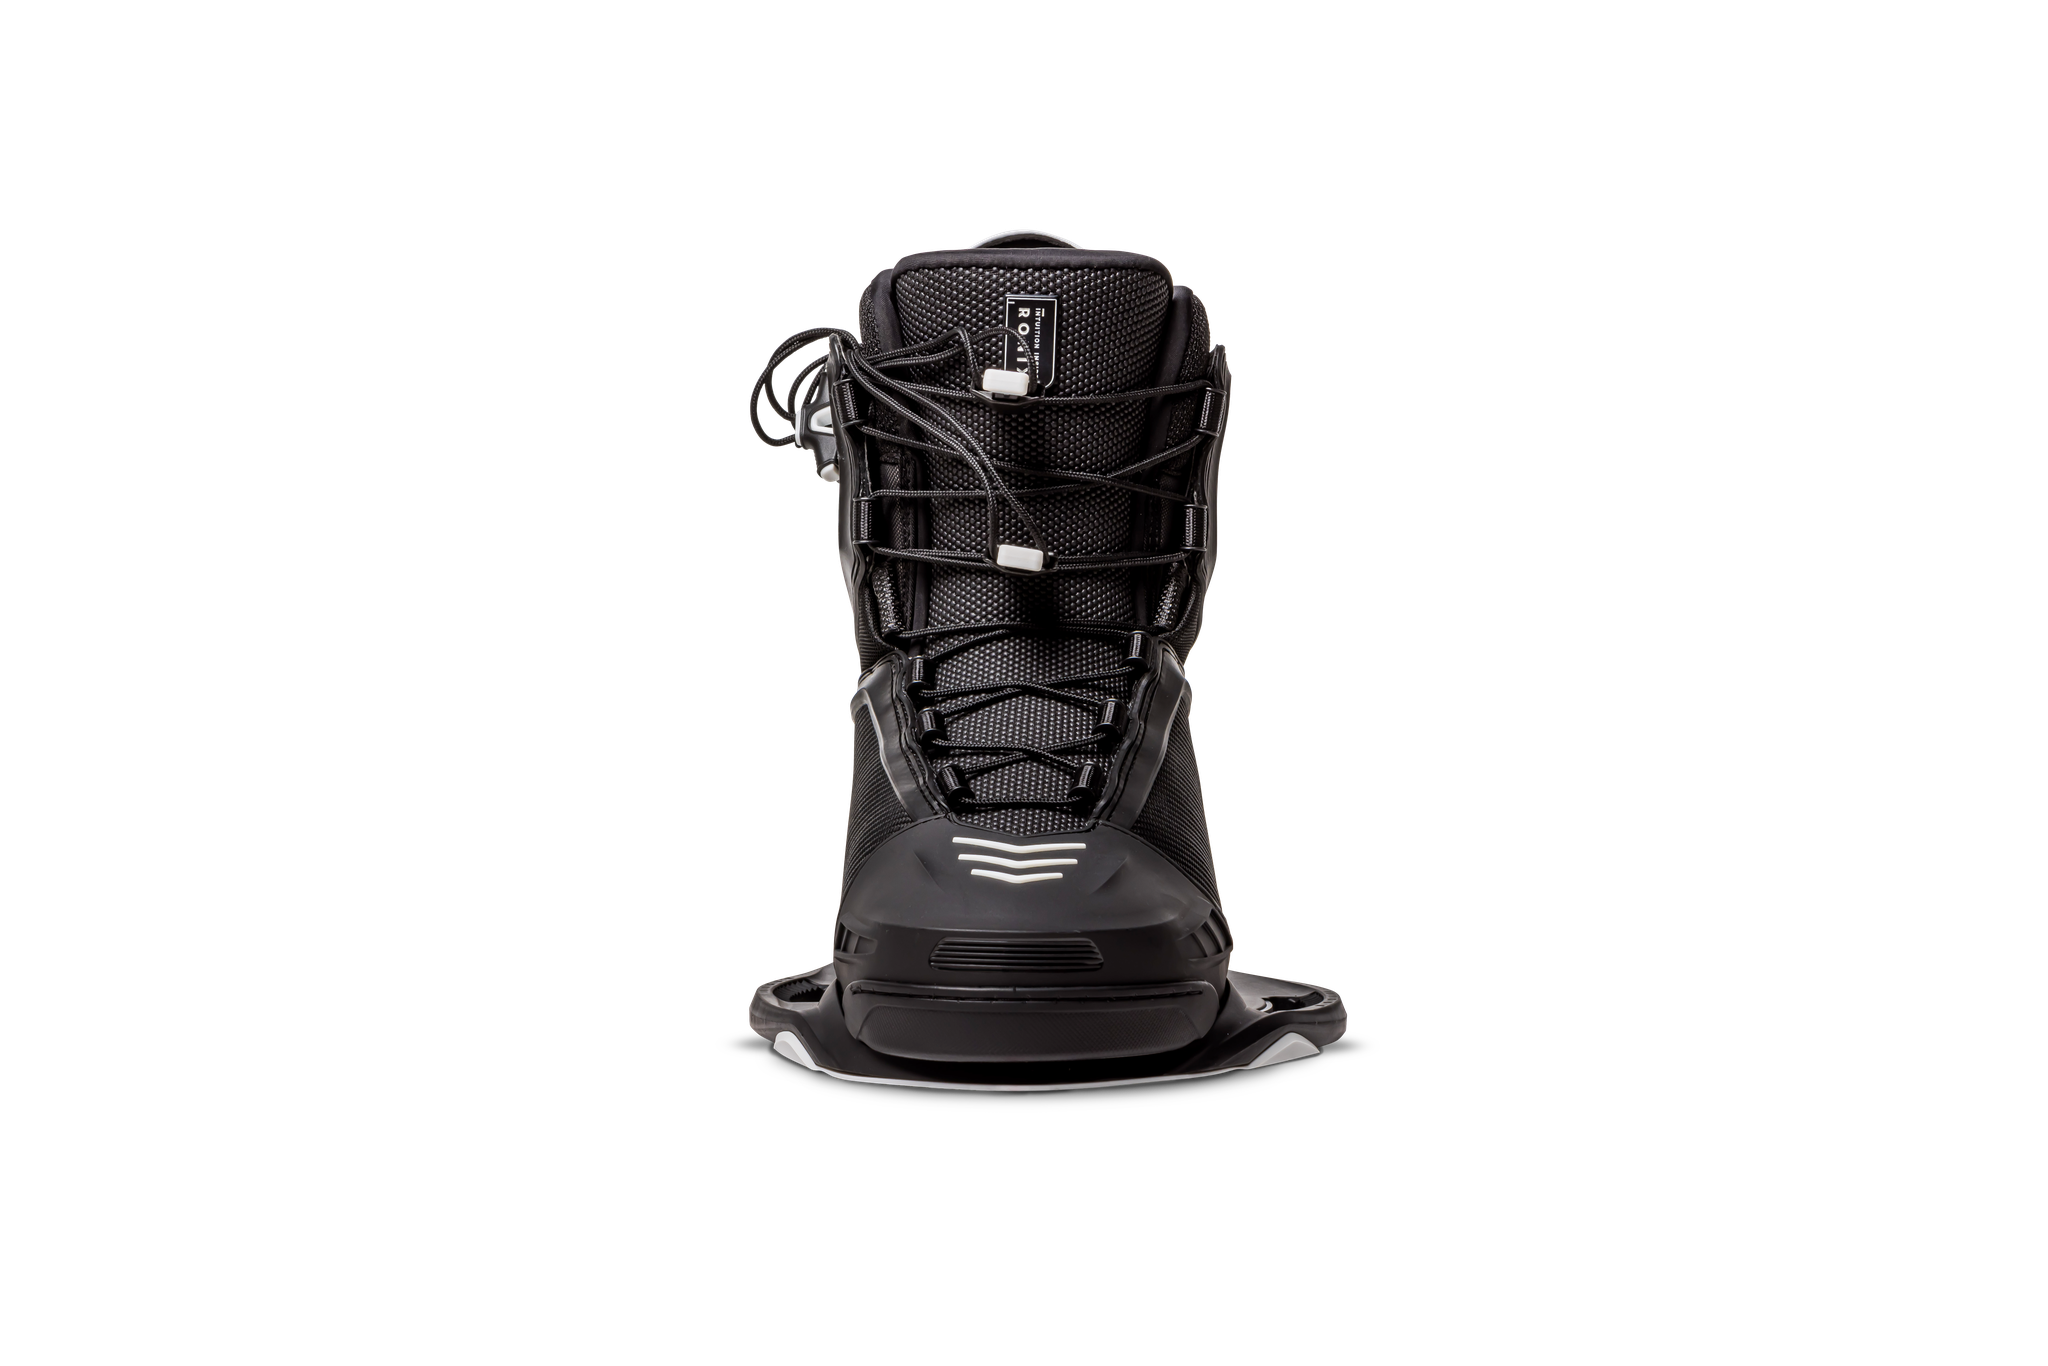 A black Ronix 2024 One Boot featuring a Cordura ballistic nylon upper and an Intuition+ heat moldable liner, showcased against a sleek black background.